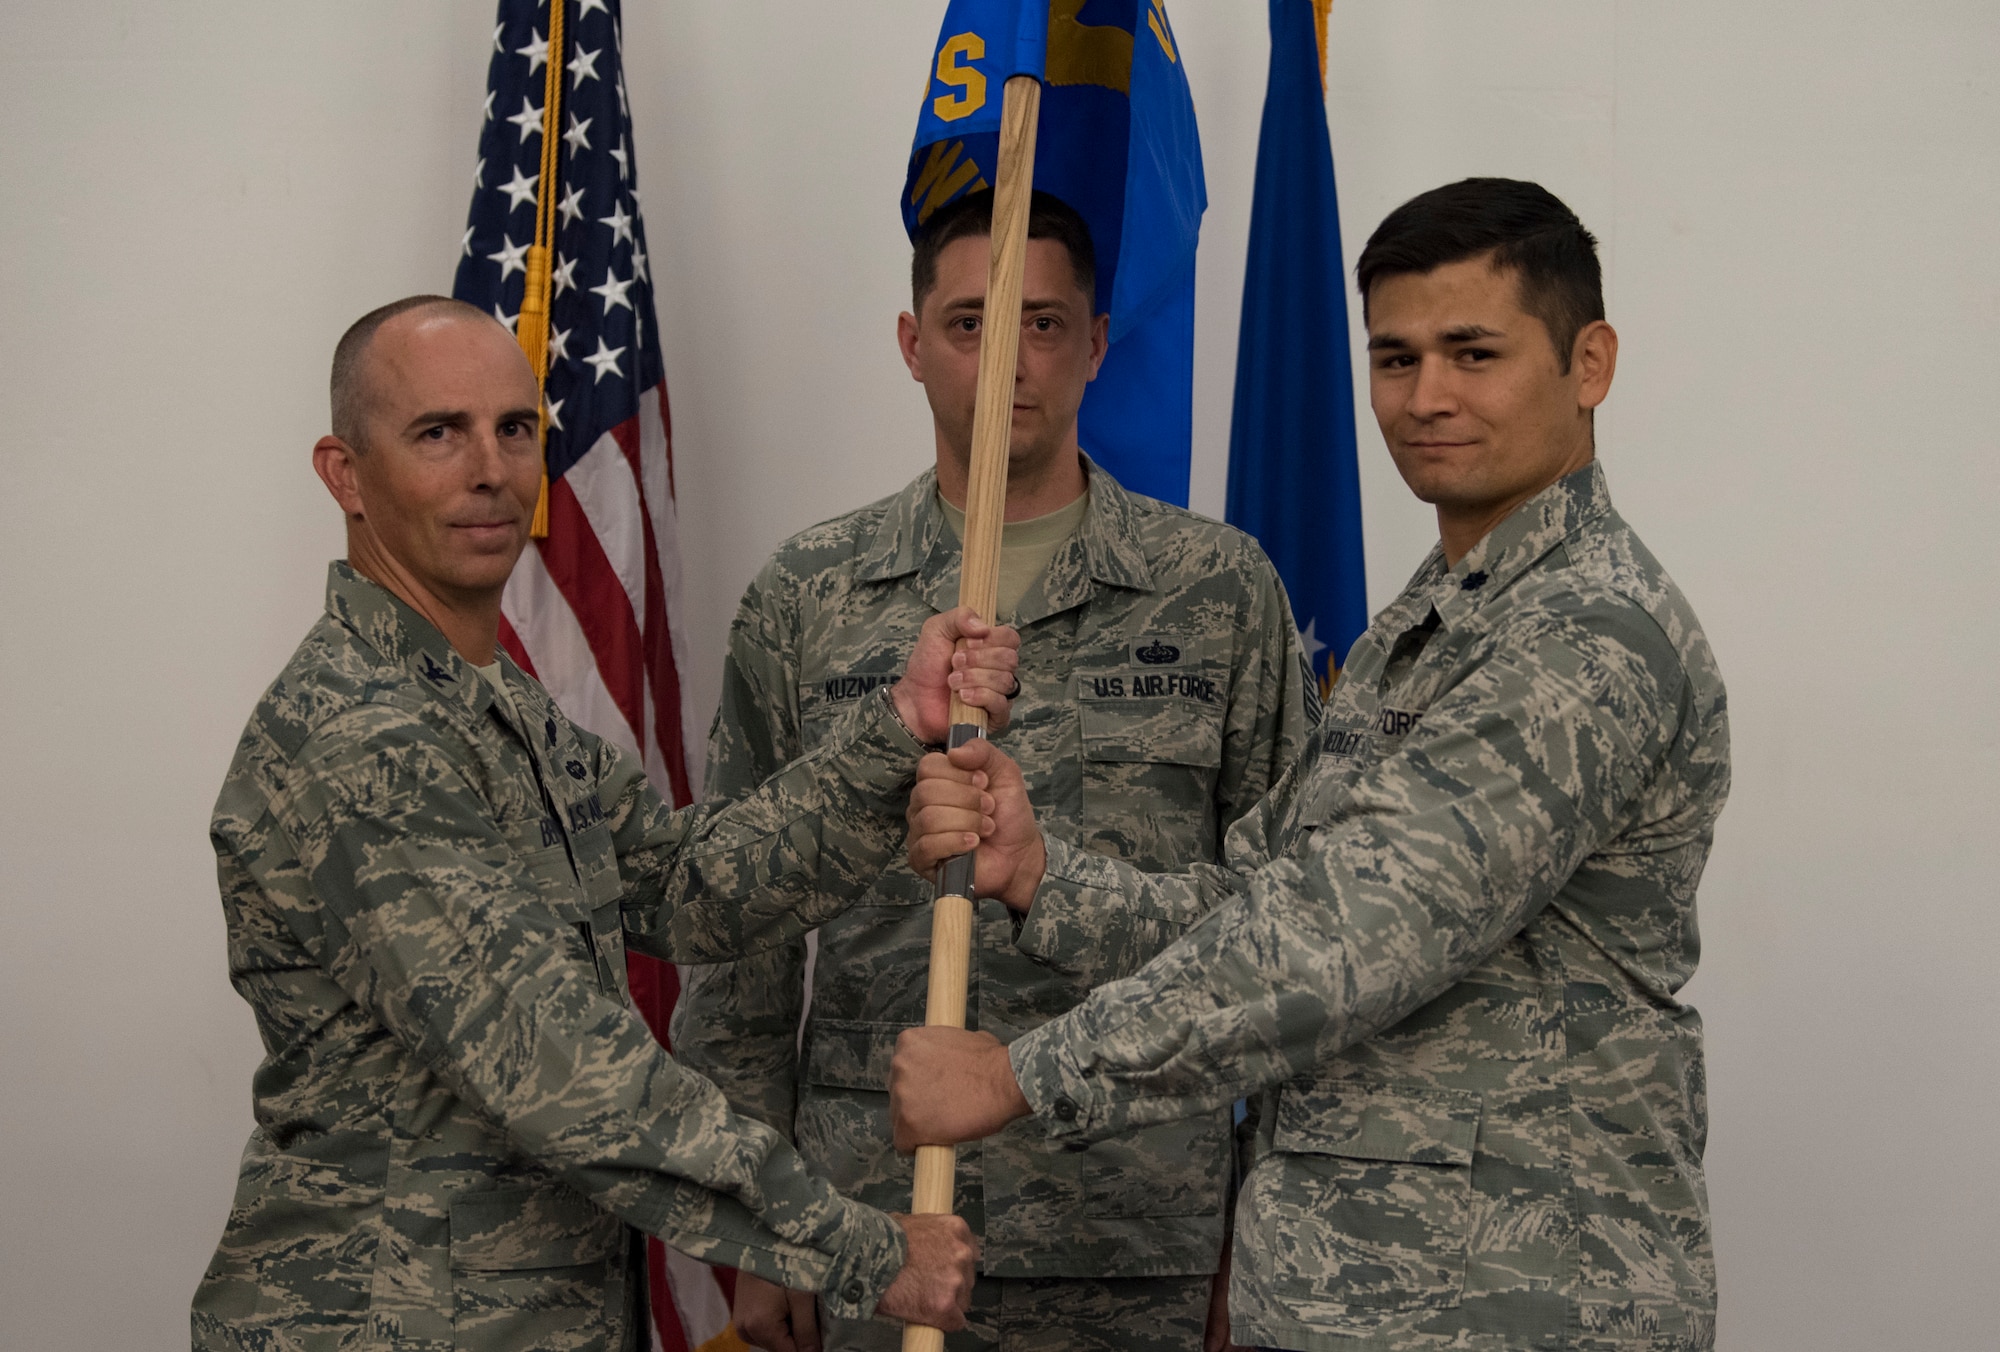 Col. Steven Behmer, U. S. Air Force Weapons School commandant, passes a guidon to Lt. Col. Douglas Medley, 32nd Weapons Squadron commander during an assumption of command ceremony at Nellis Air Force Base, Nevada, June 28, 2018. The 32nd WPS will focus on the Cyber Warfare Operations Weapons Instructor Course taught at the Weapons School. (U.S. Air Force photo by Airman 1st Class Andrew D. Sarver)